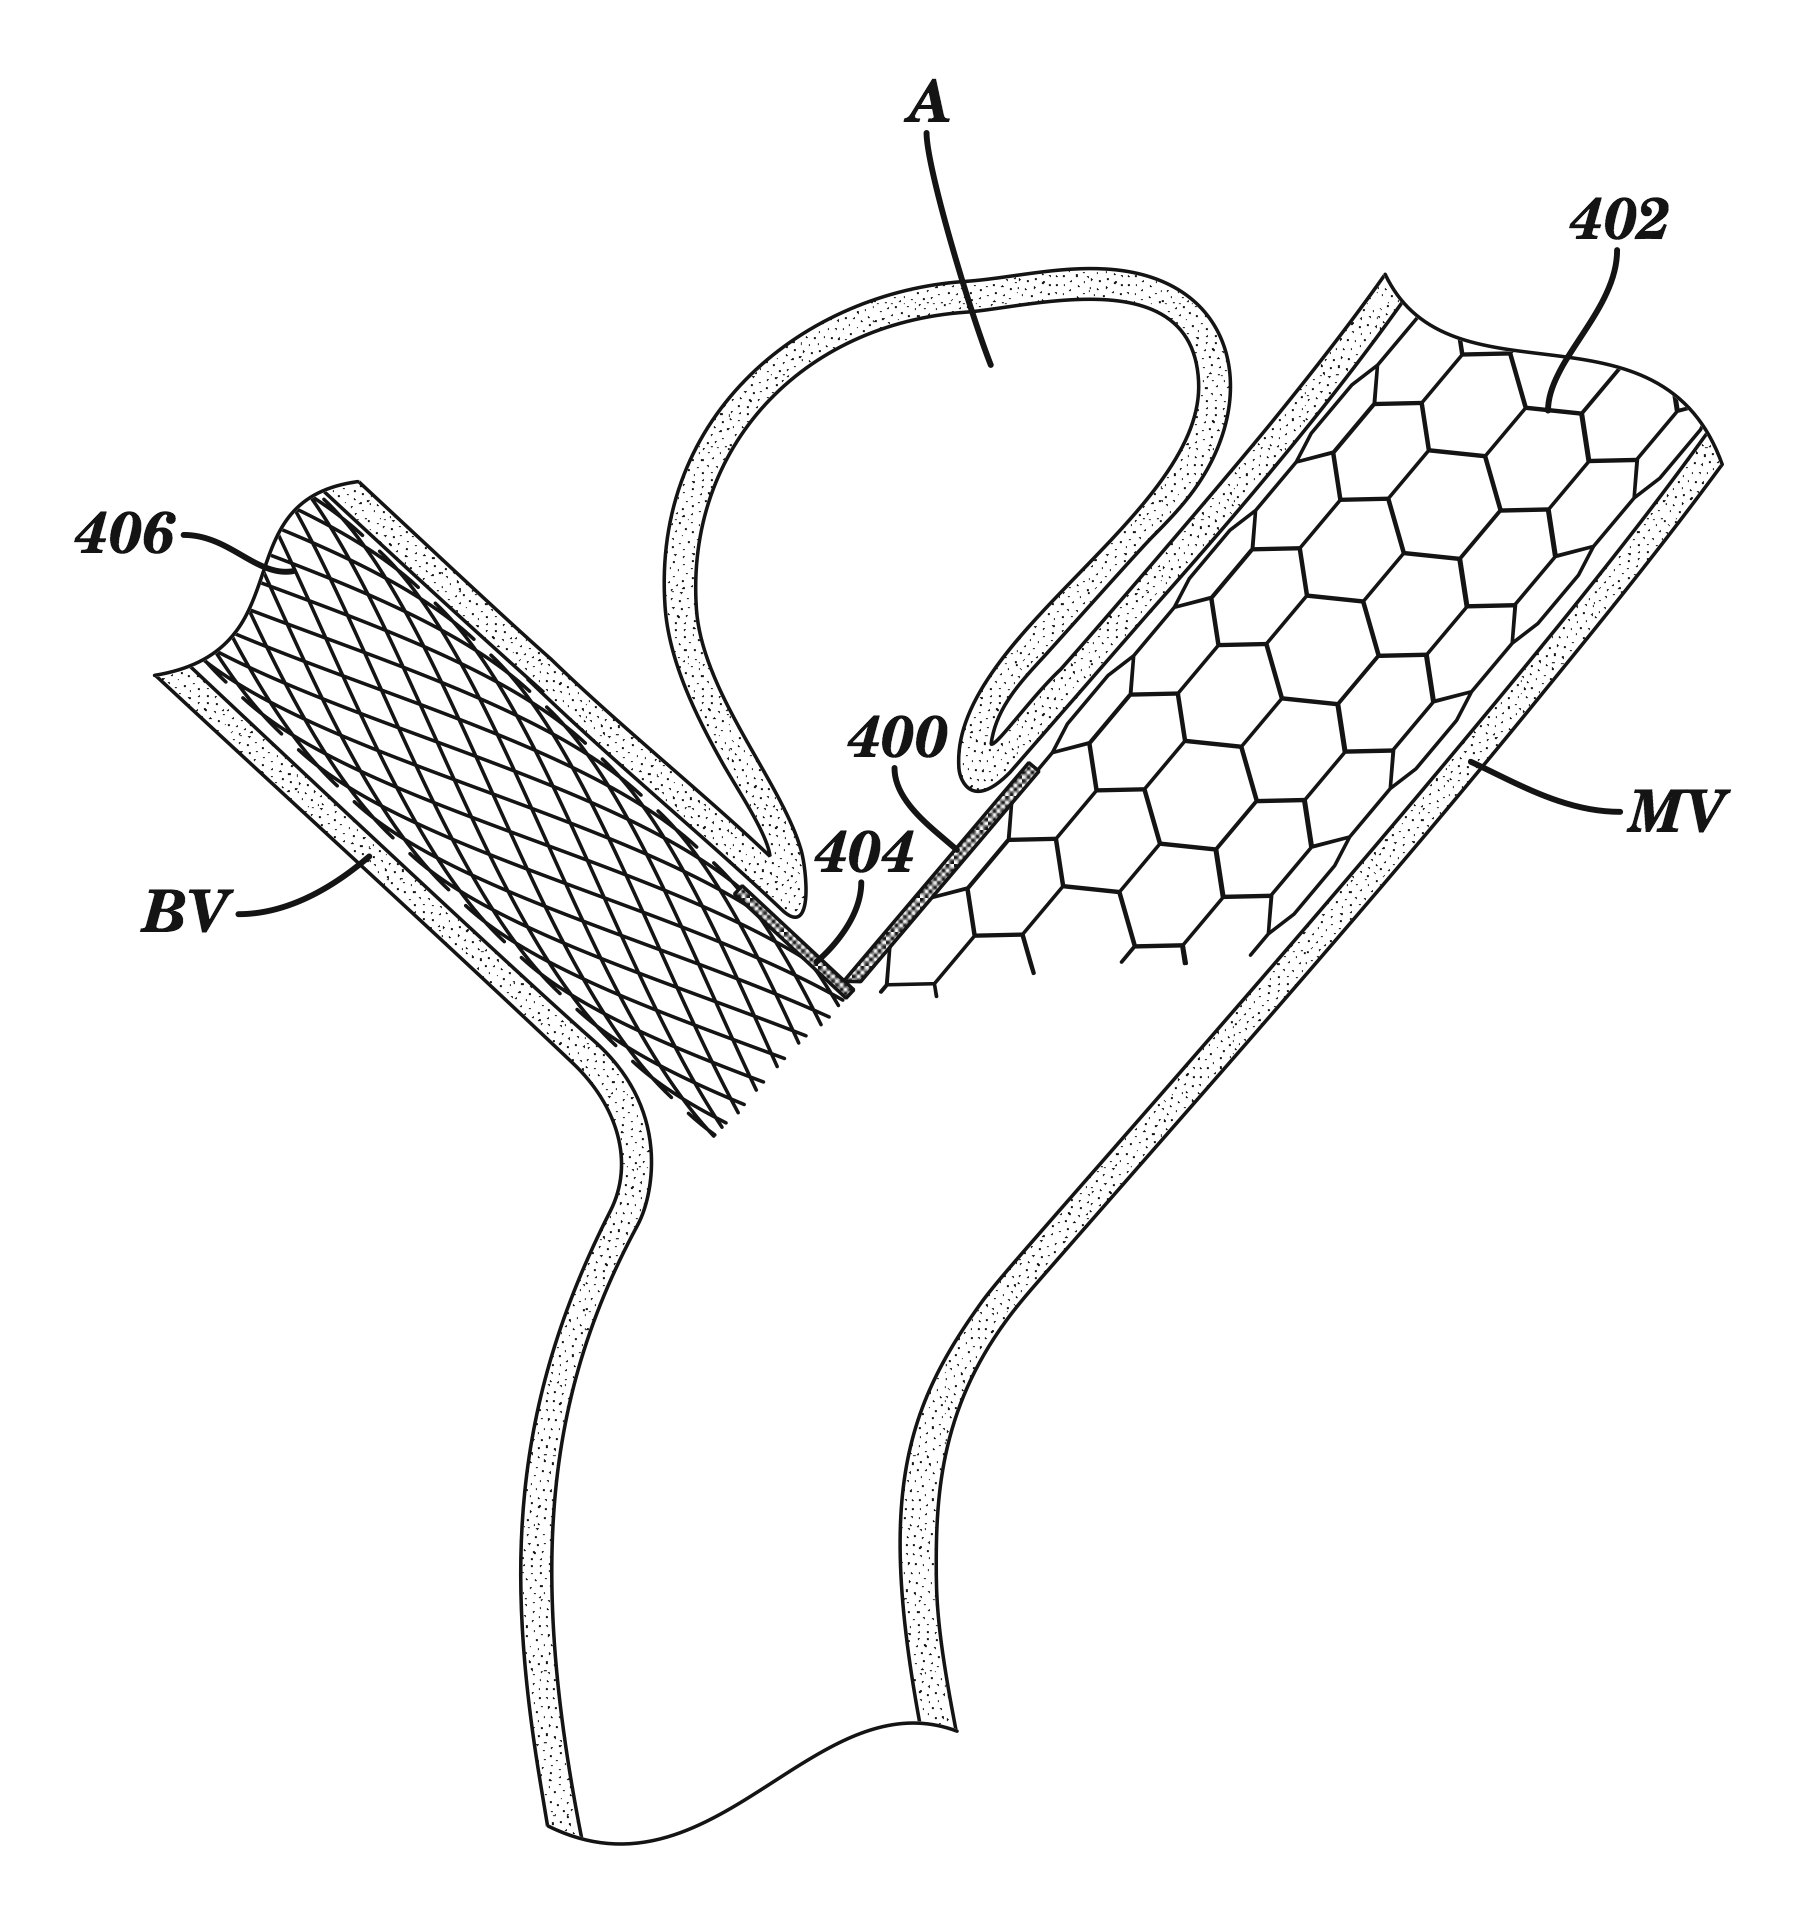 20_ptiserviceco_patent_drawing_biotechnology.png